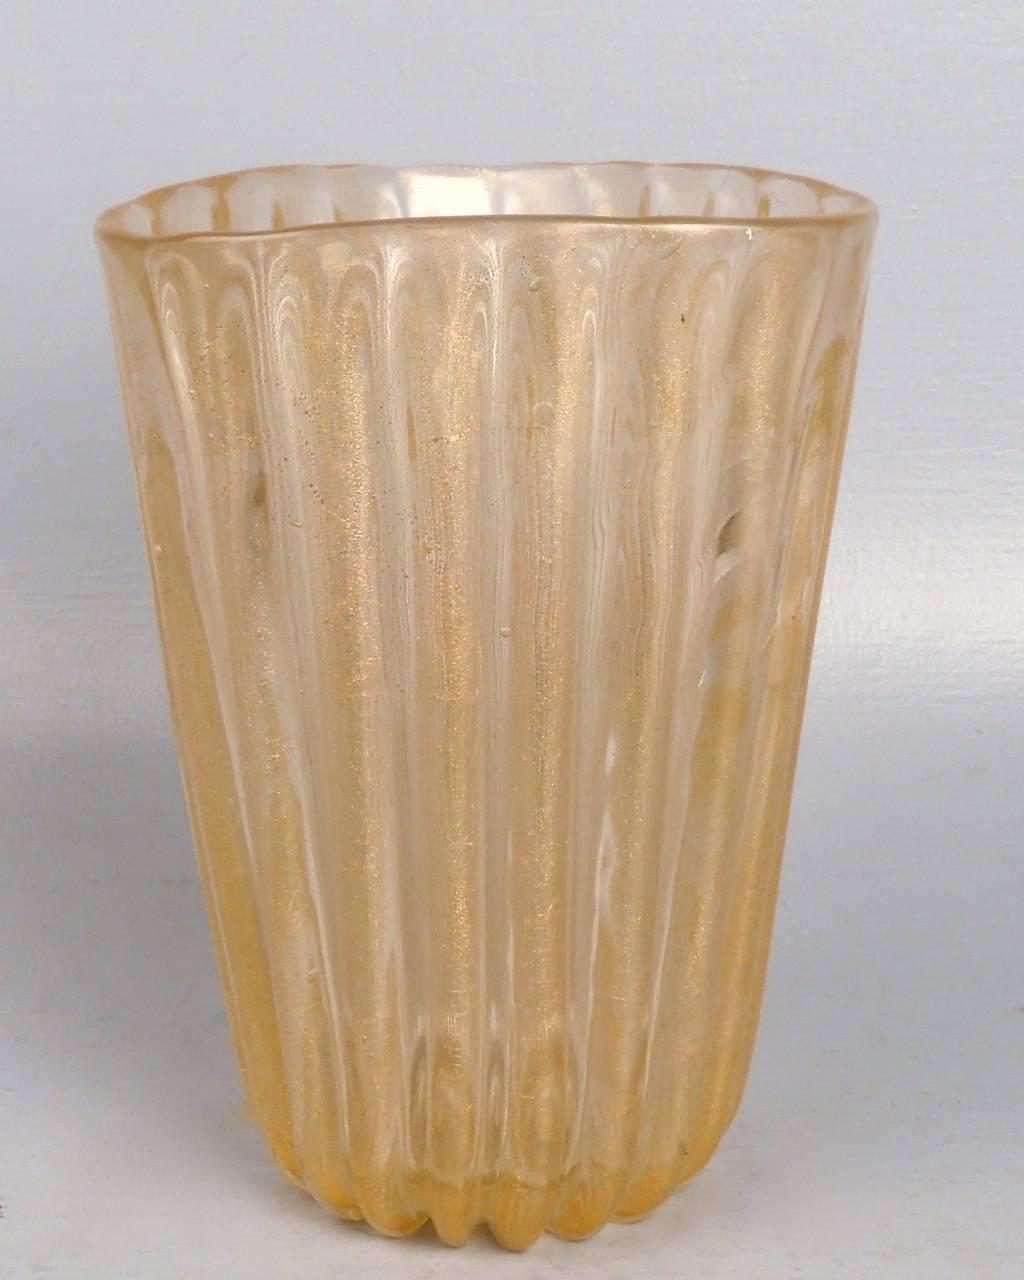 This thickly walled, ribbed vase designed by Archimede Seguso has gold fleck or foil inclusions and is labeled twice. This sturdy vase is organically modeled with a triangular mouth and straight tapered walls. A fine example of Mid-Century Italian